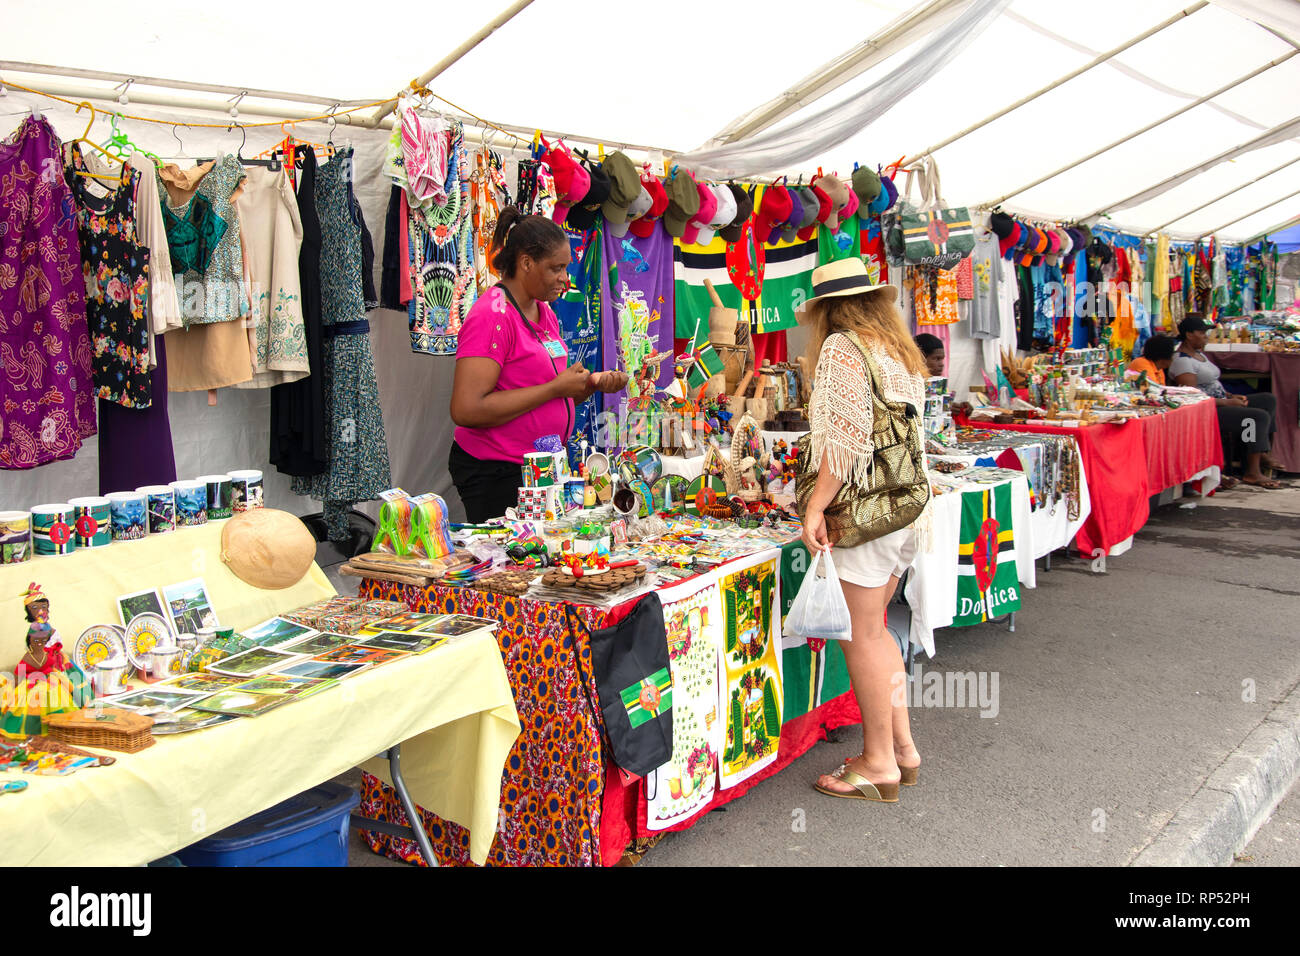 Souvenir stalls on seafront, Dame Mary Eugenia Charles Blvd, Roseau, Dominica, Lesser Antilles, Caribbean Stock Photo